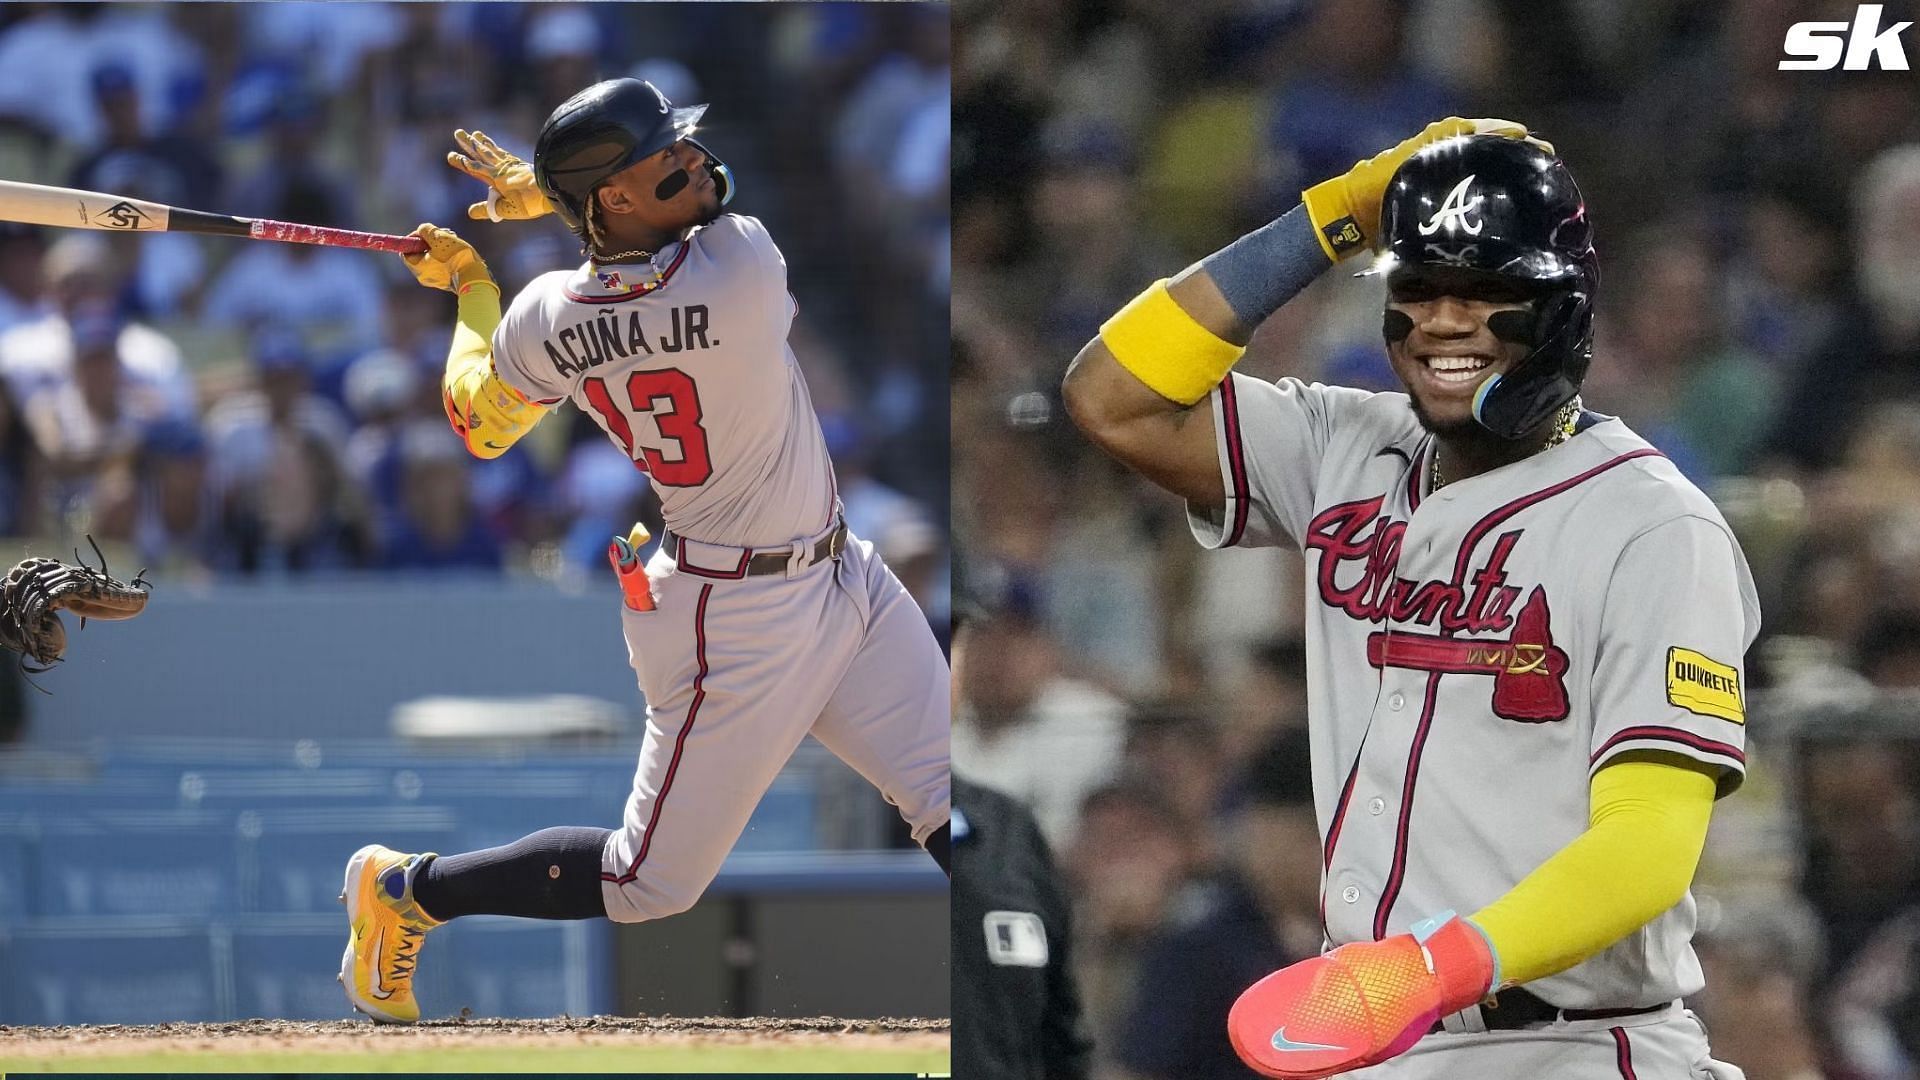 Ronald Acuna Jr. blasts another HR as Braves beat Dodgers